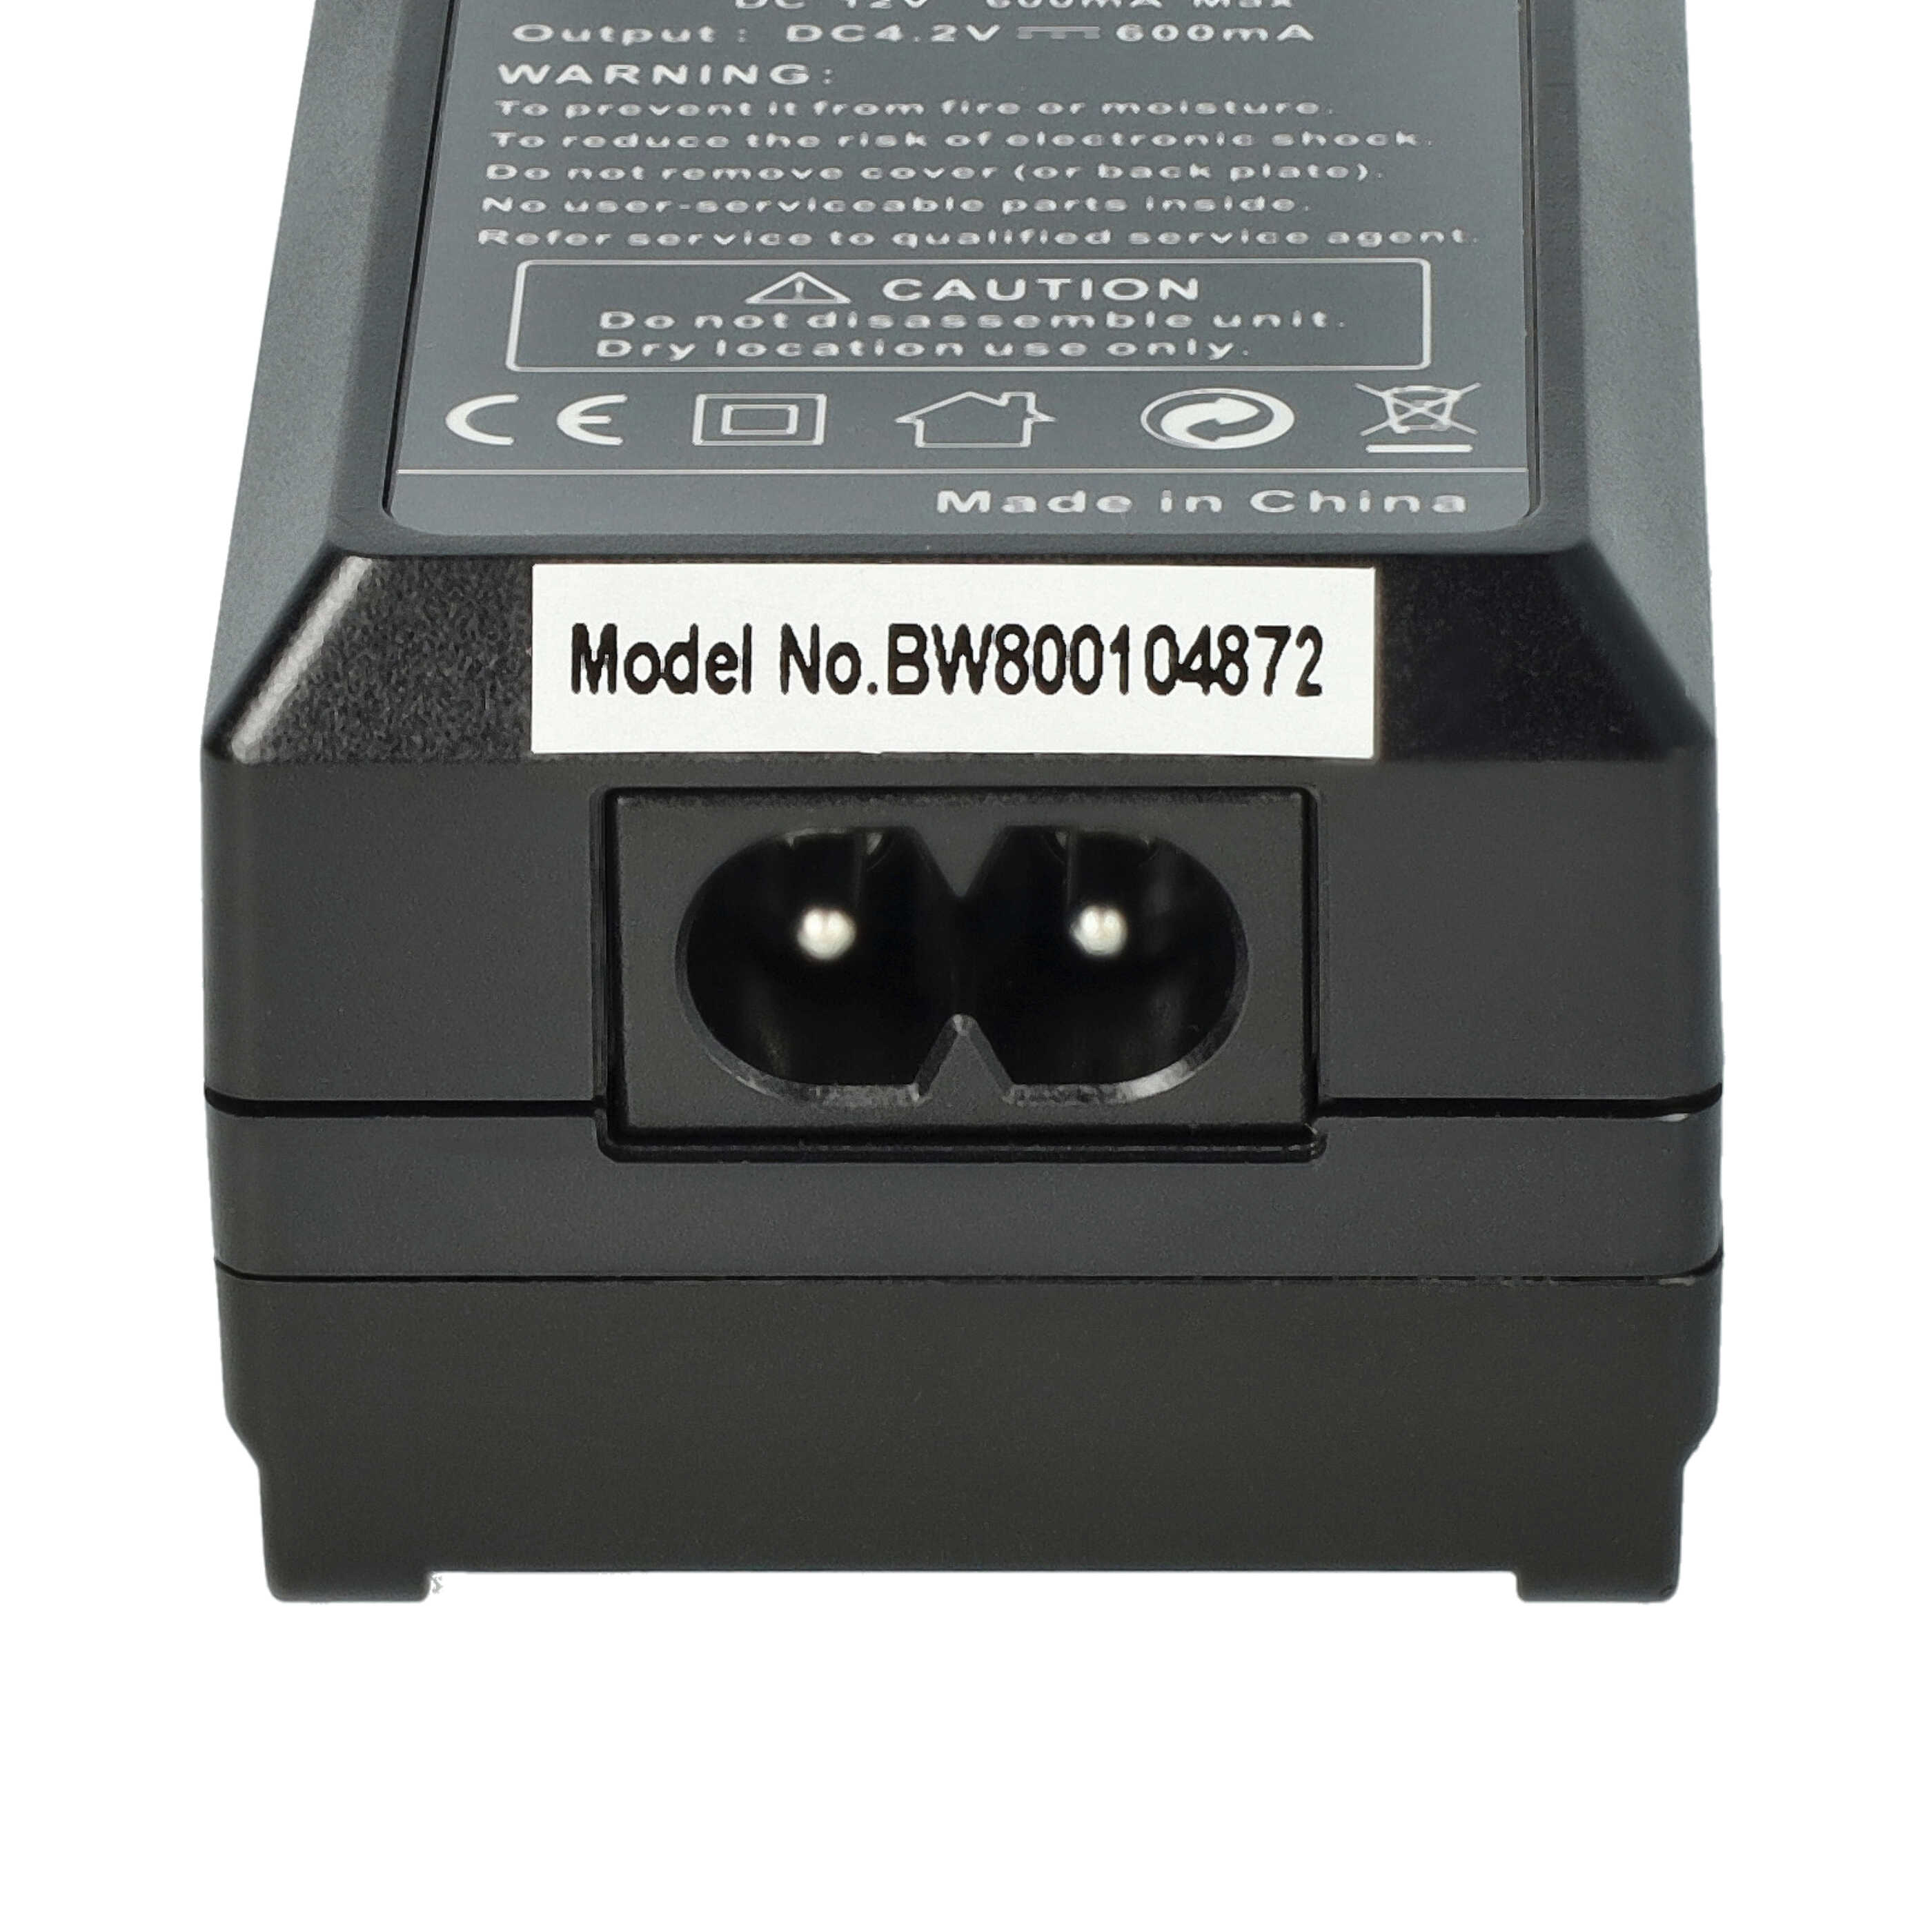 Battery Charger suitable for Lumix DMC-FT7 Camera etc. - 0.6 A, 4.2 V